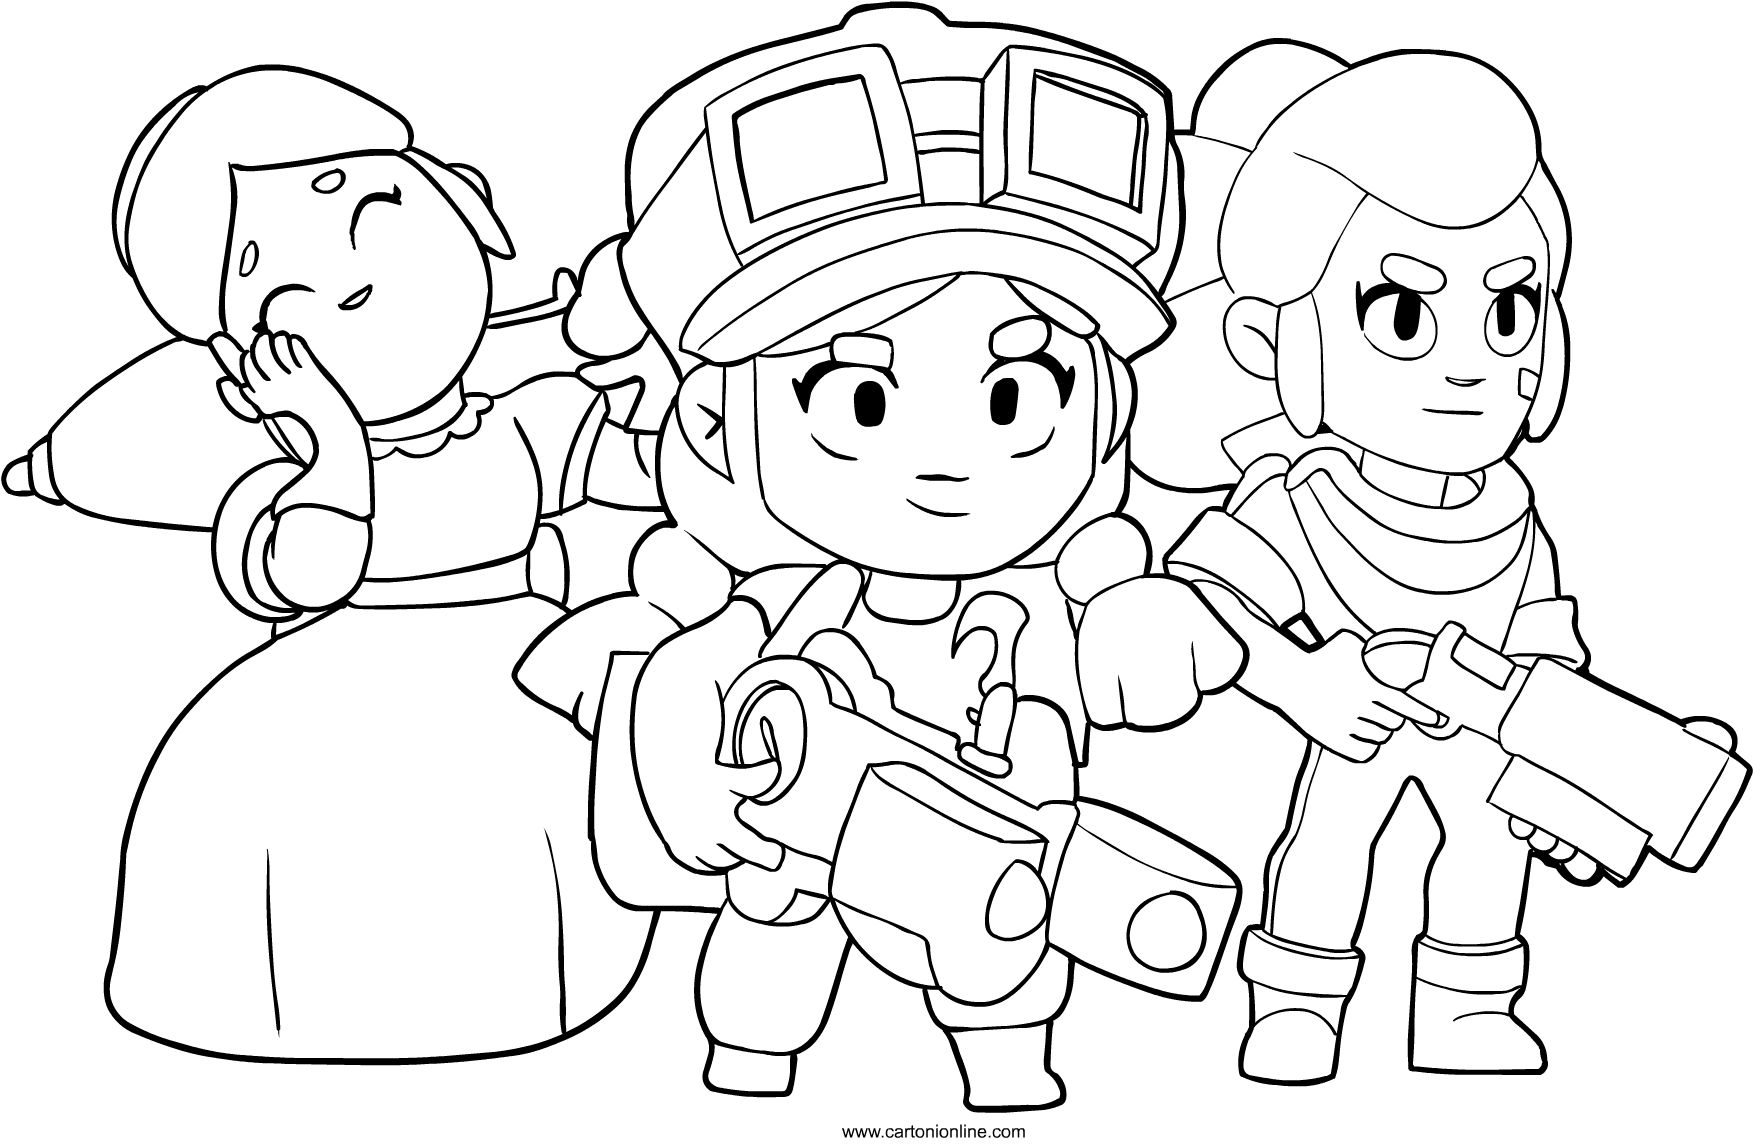 characters from Brawl Stars coloring pages to print and coloring